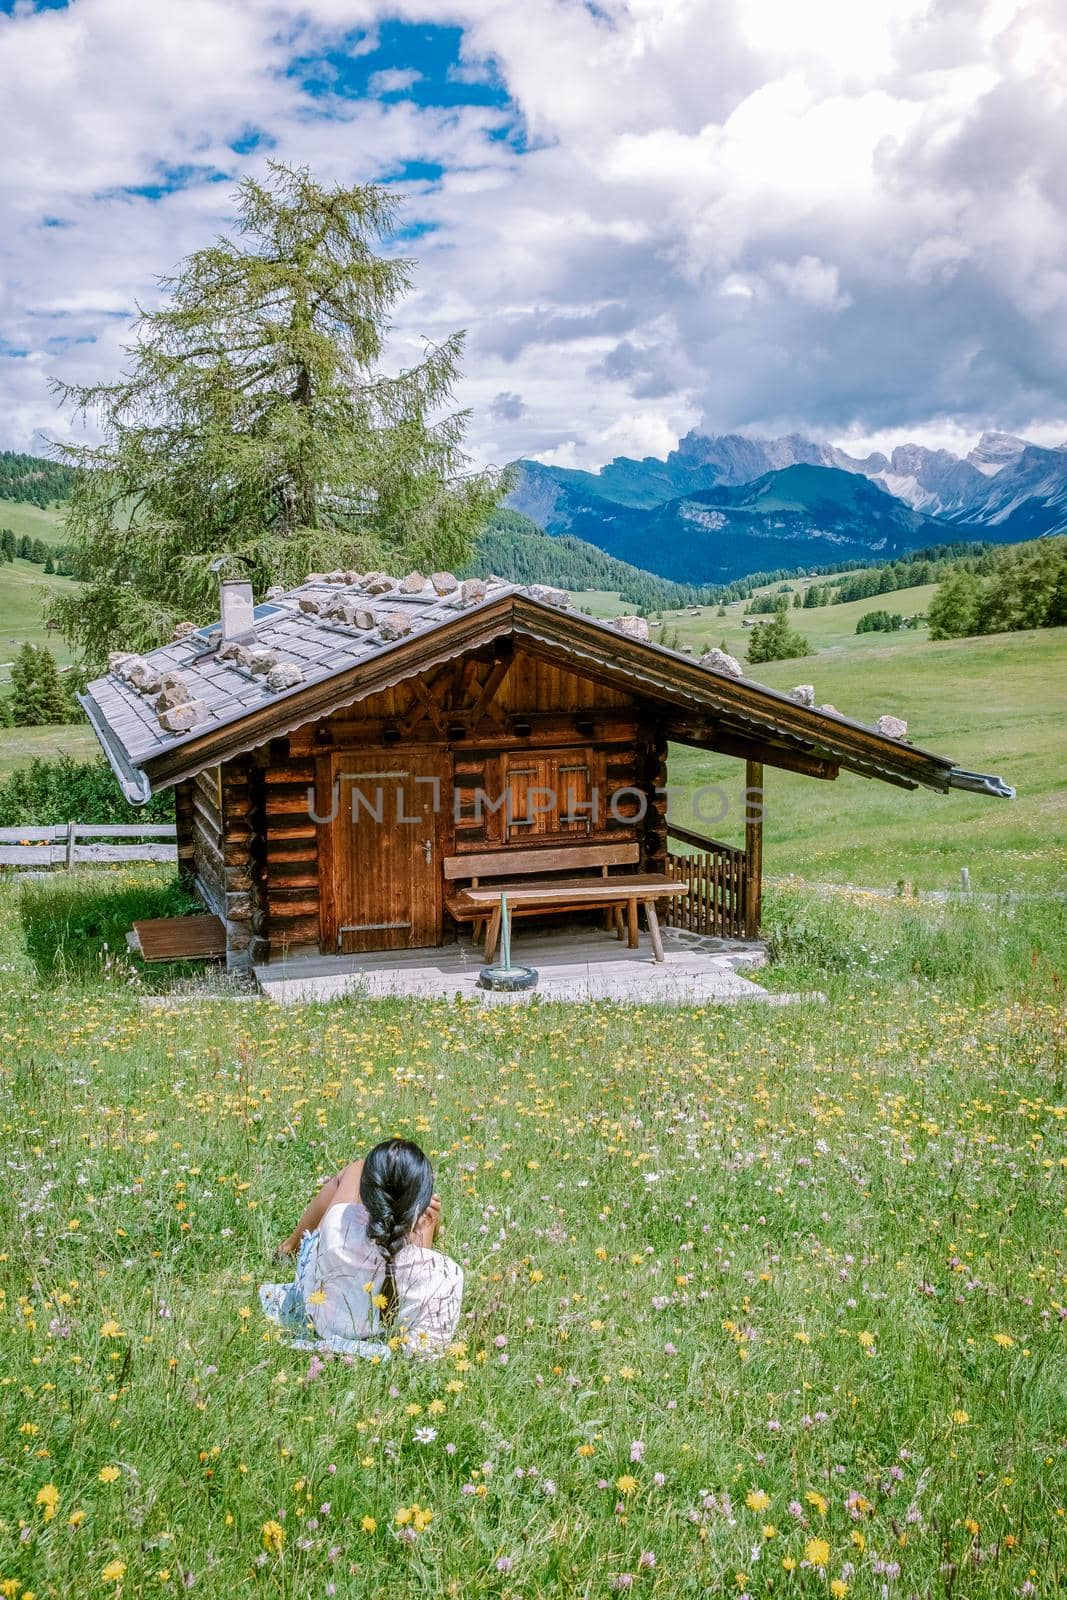  woman on vacation in the Dolomites Italy,Alpe di Siusi - Seiser AlmSouth Tyrol, Italy. Europe